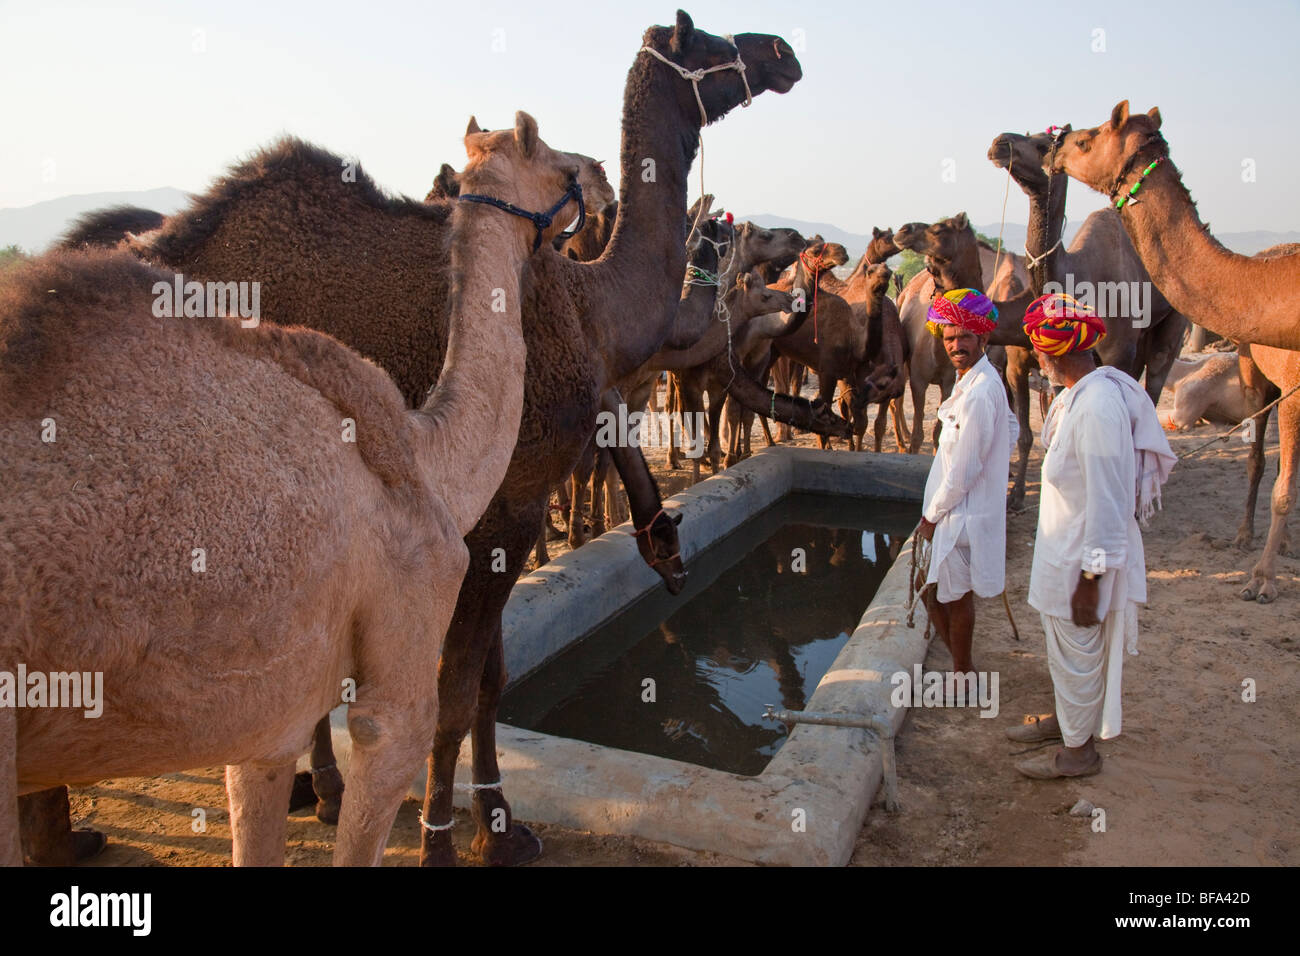 Camels around a watering trough at the Camel Fair in Pushkar India Stock Photo